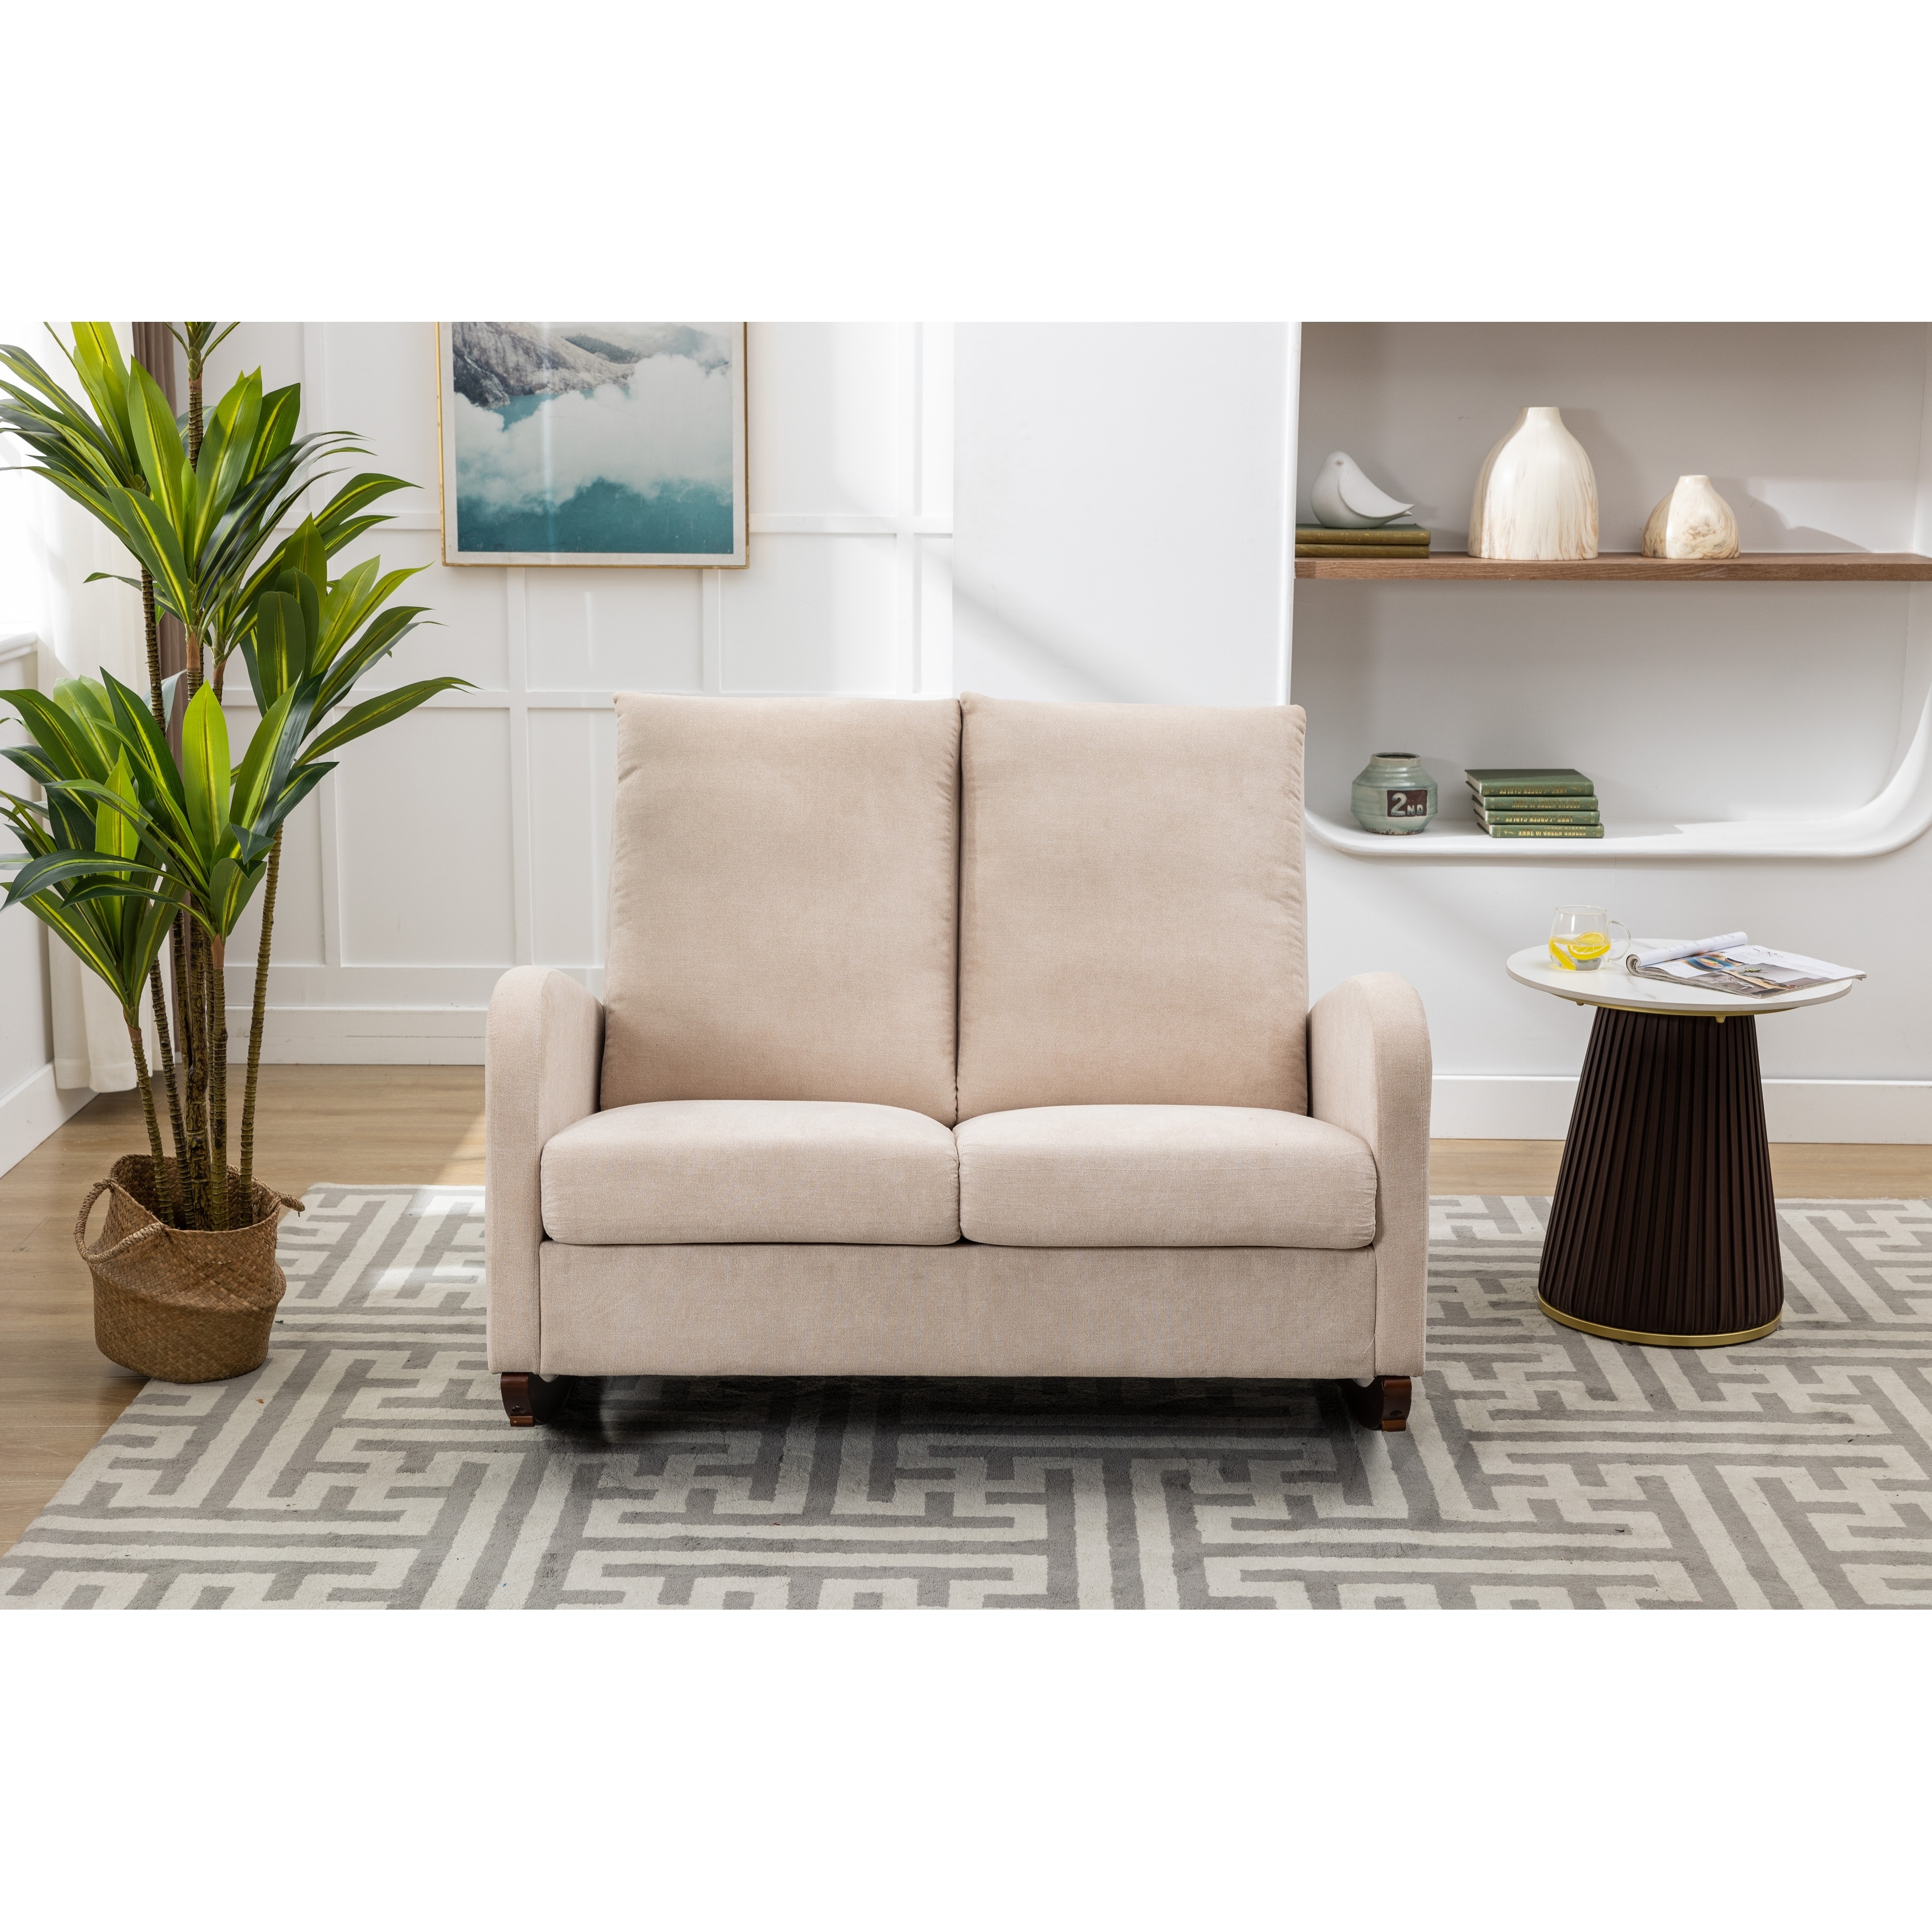 Double Wide Rocker Armchair, Upholstered Loveseat Rocking Sofa, Rocking  Relax Sofa with Side Pocket, Oversized Rocking Loveseat Sofa with Padded  Seat